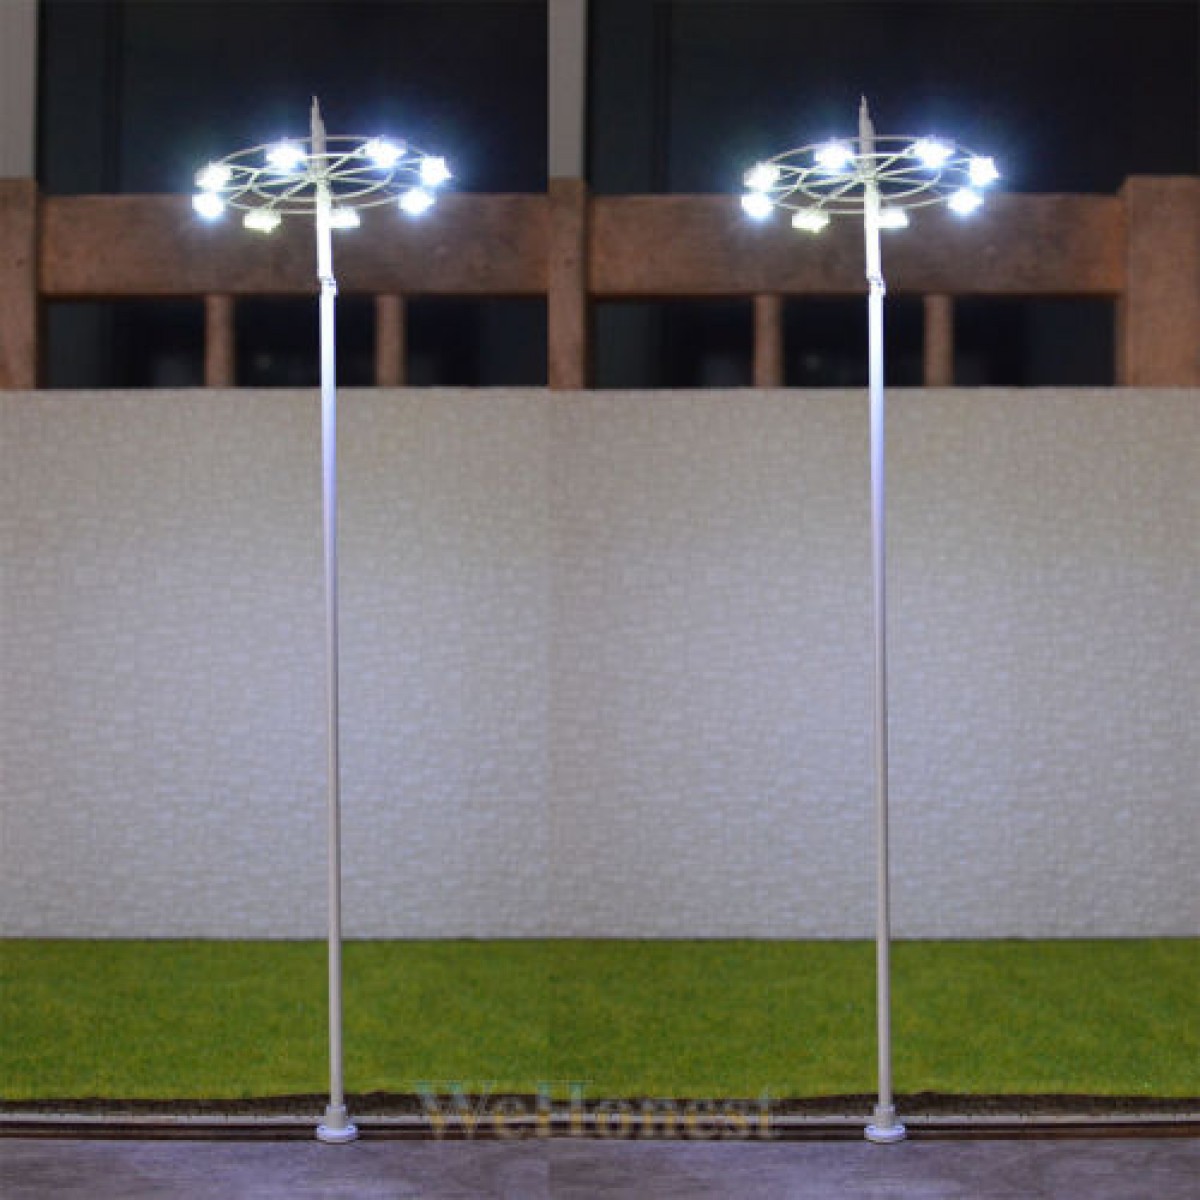 1 x O scale Plaza Lampposts Model lights SMD LEDs made Square Lamp #018